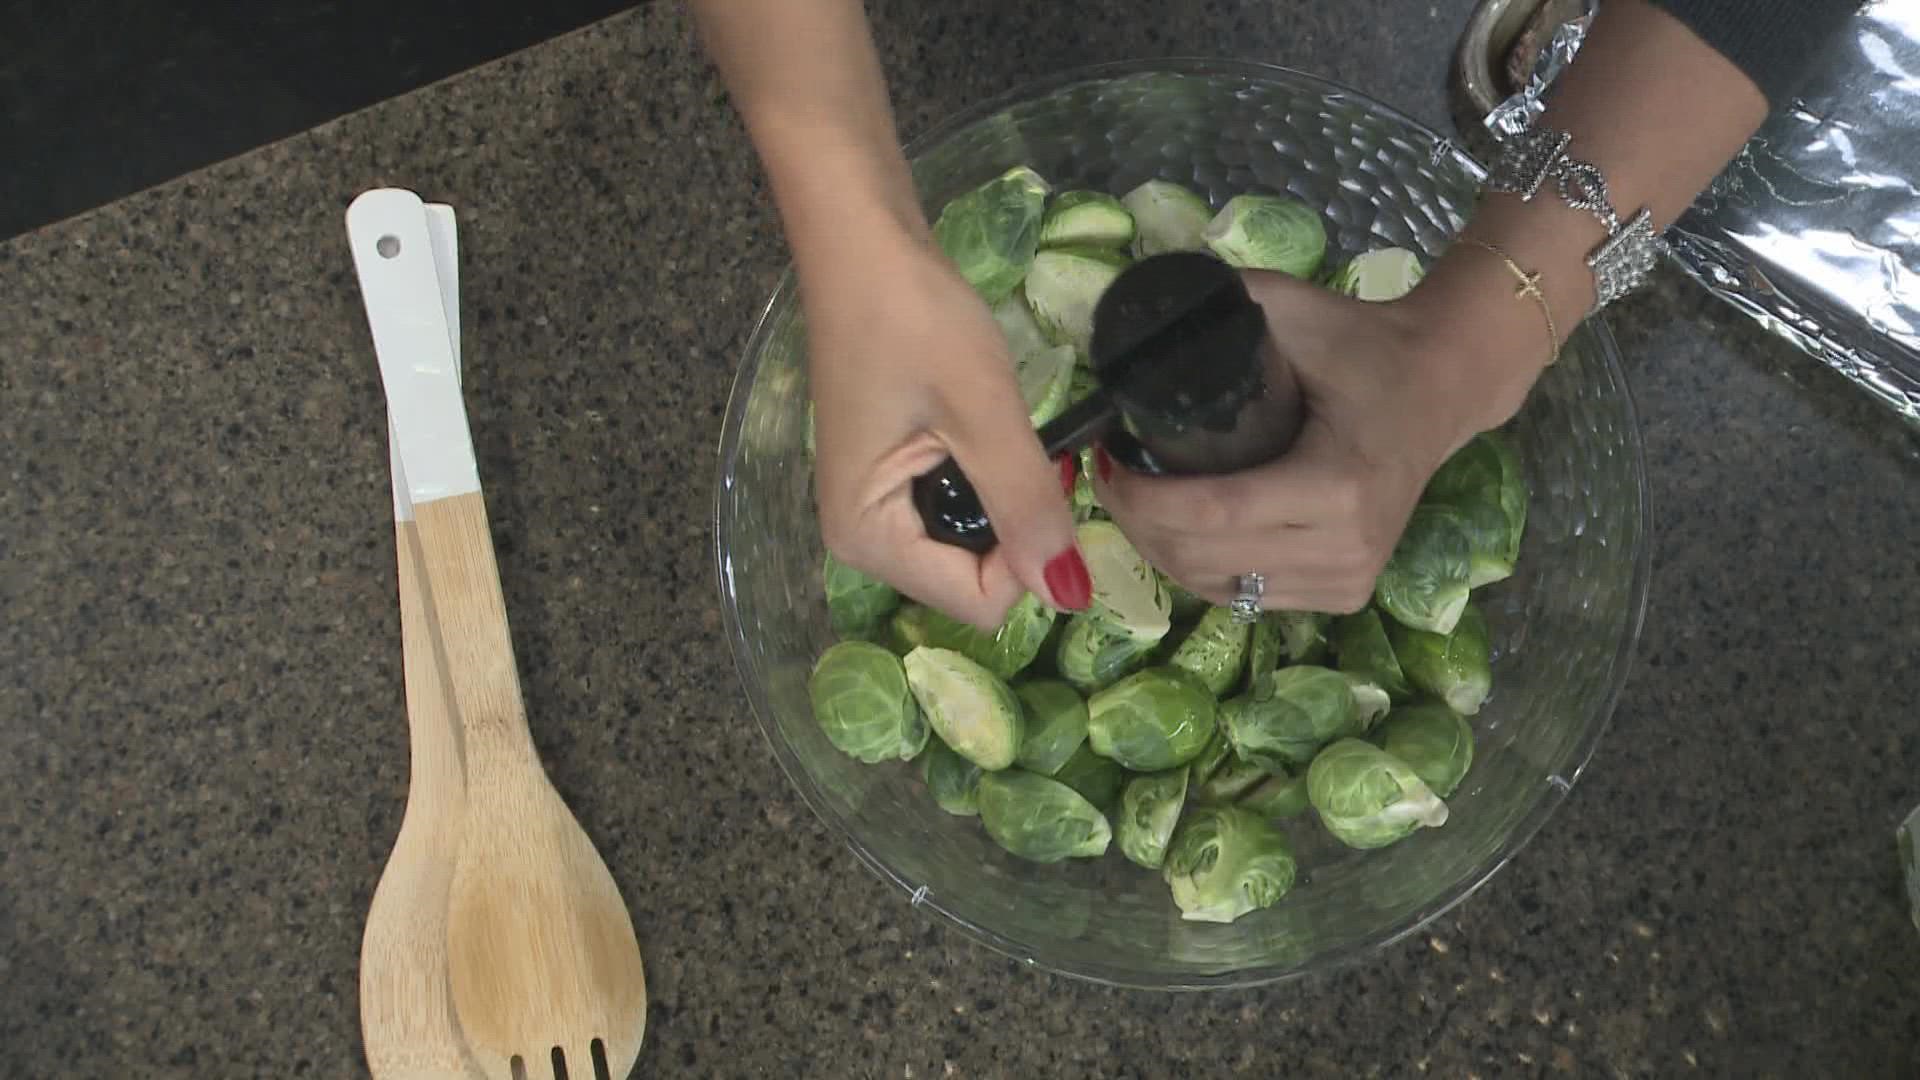 Tina Chamoun from Terranean Herbs and Spices cooks up some brussels sprouts and butternut squash.